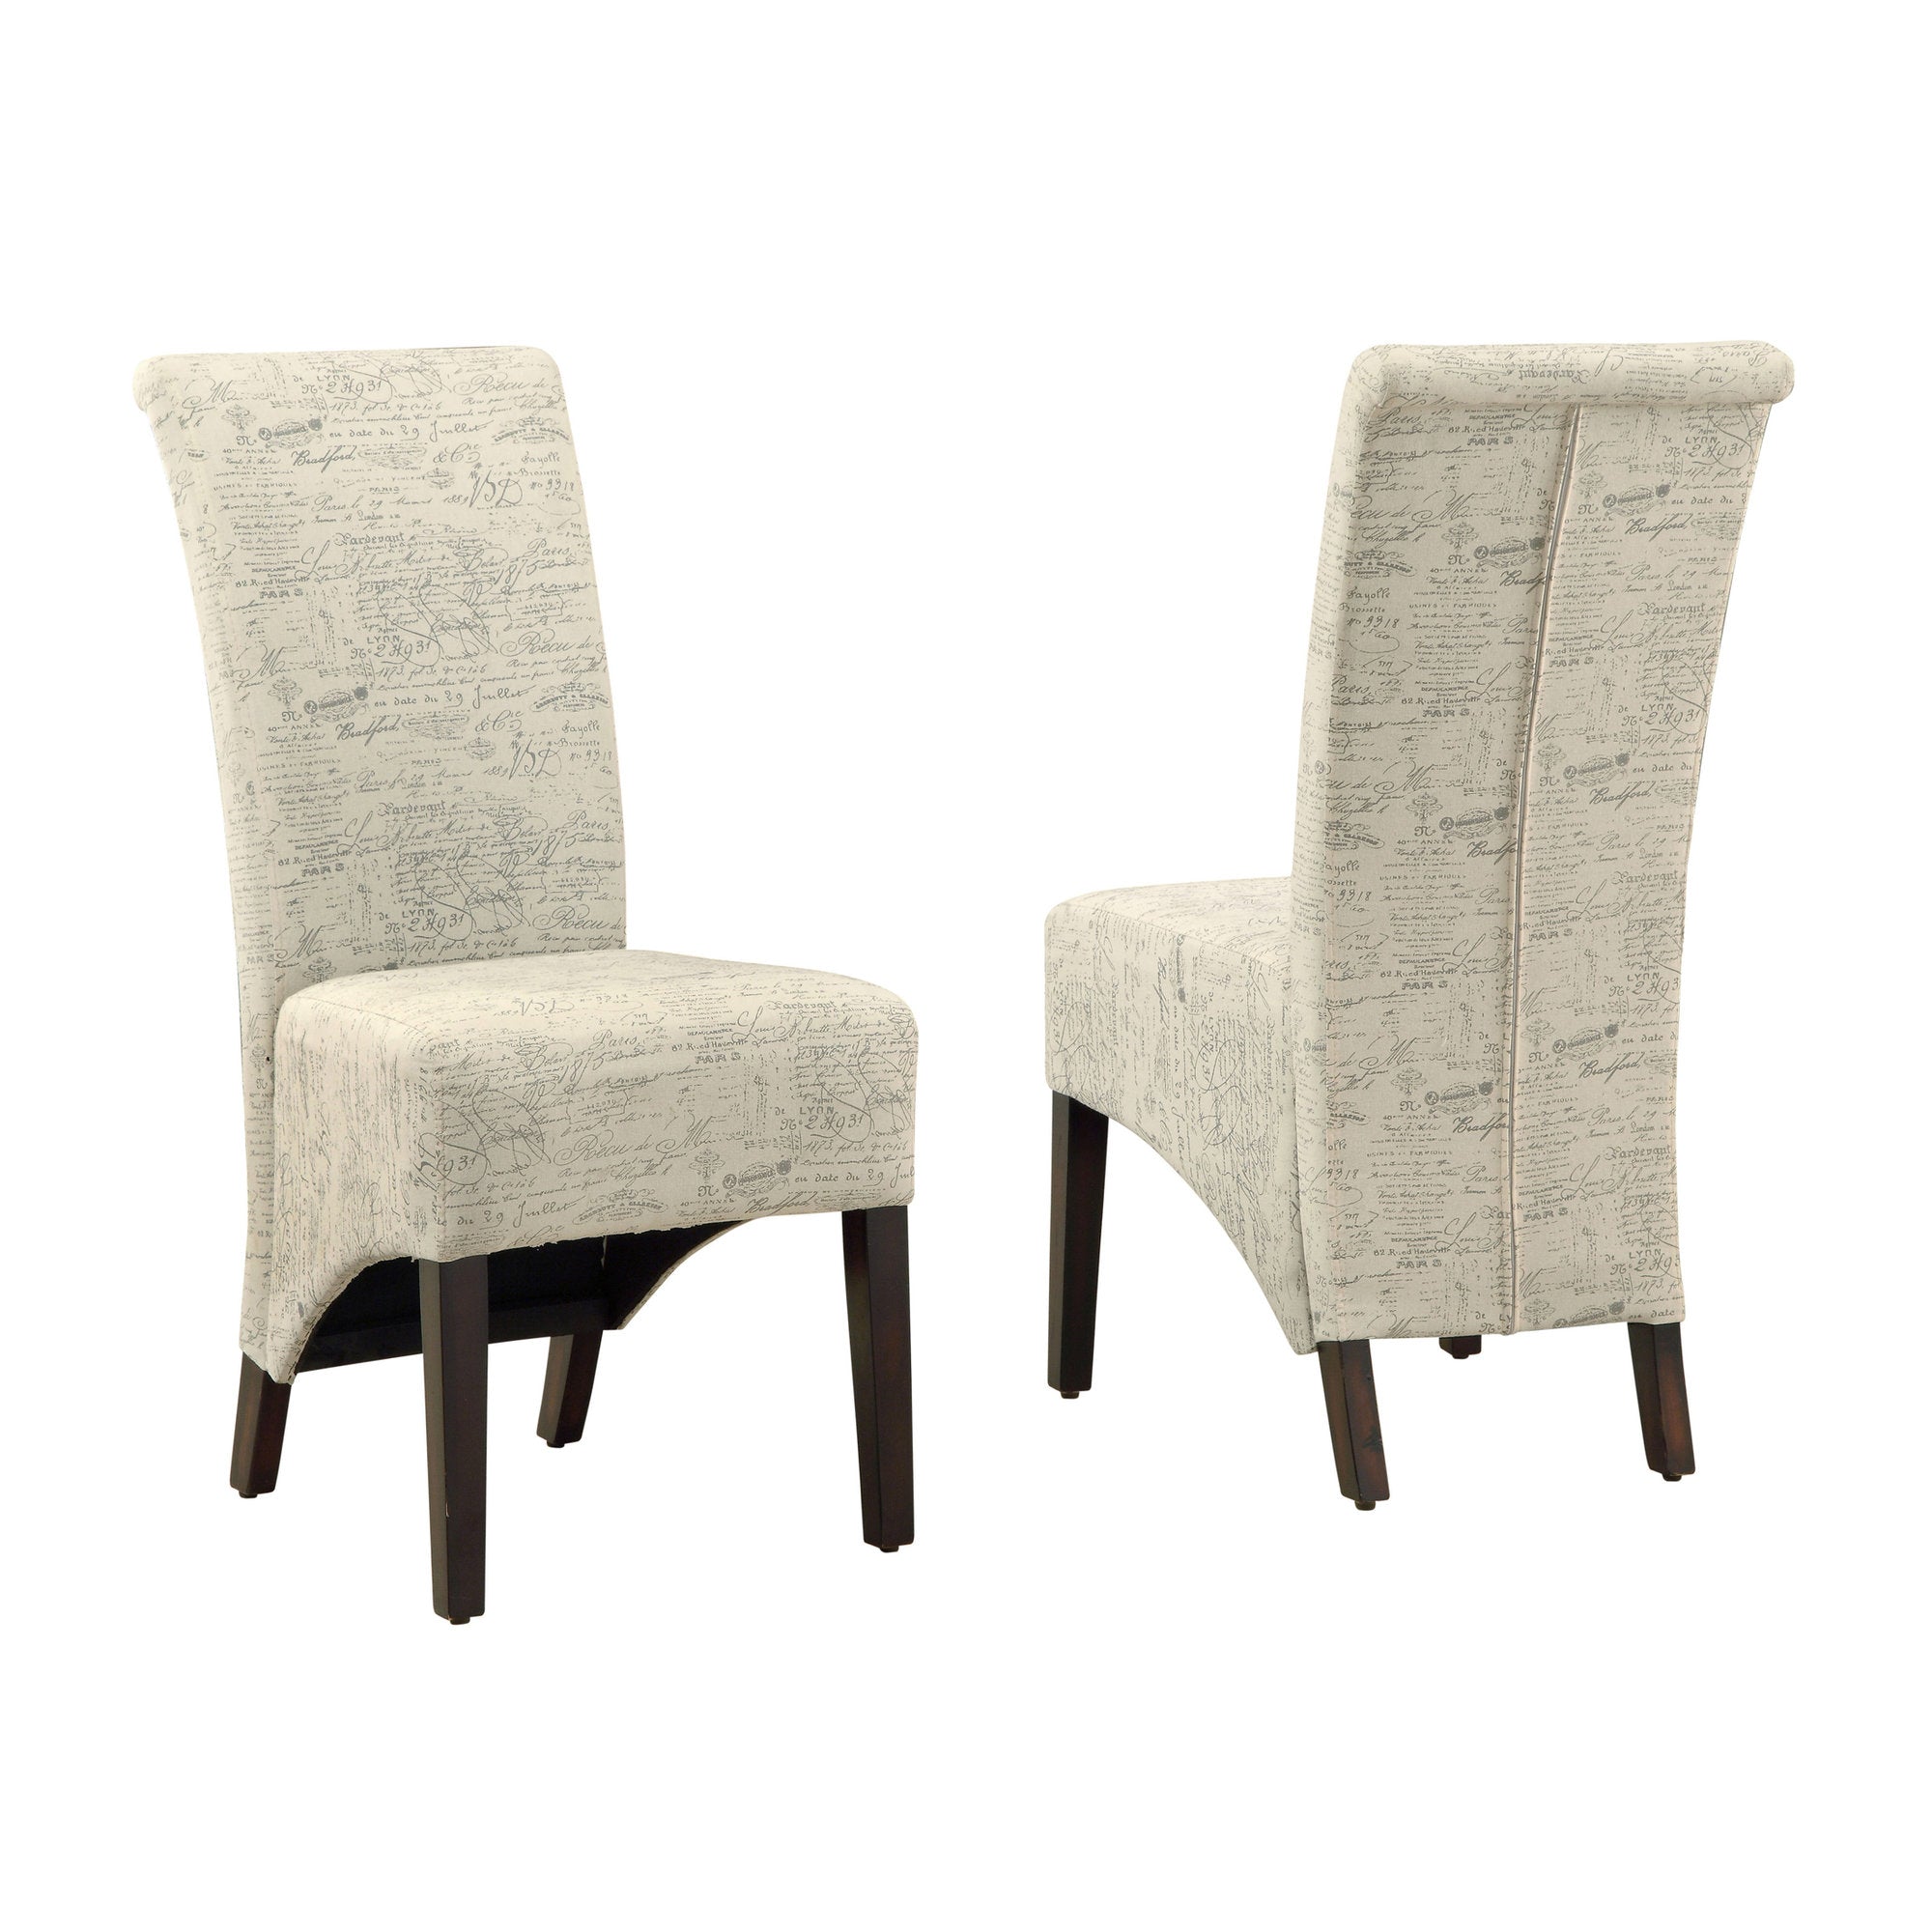 DINING CHAIR - 2PCS / 40"H / VINTAGE FRENCH FABRIC